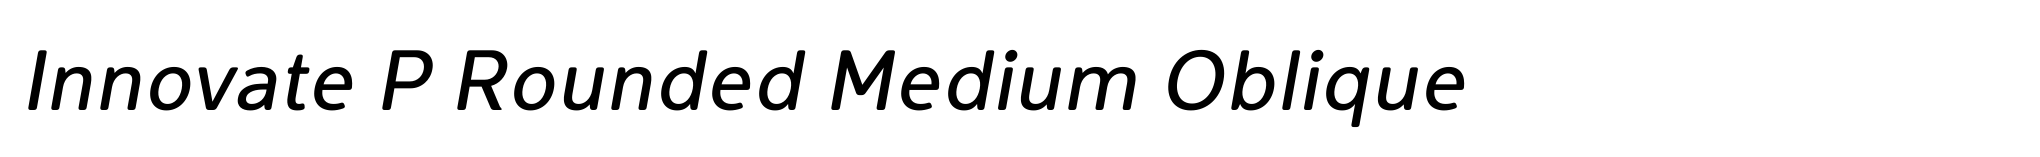 Innovate P Rounded Medium Oblique image